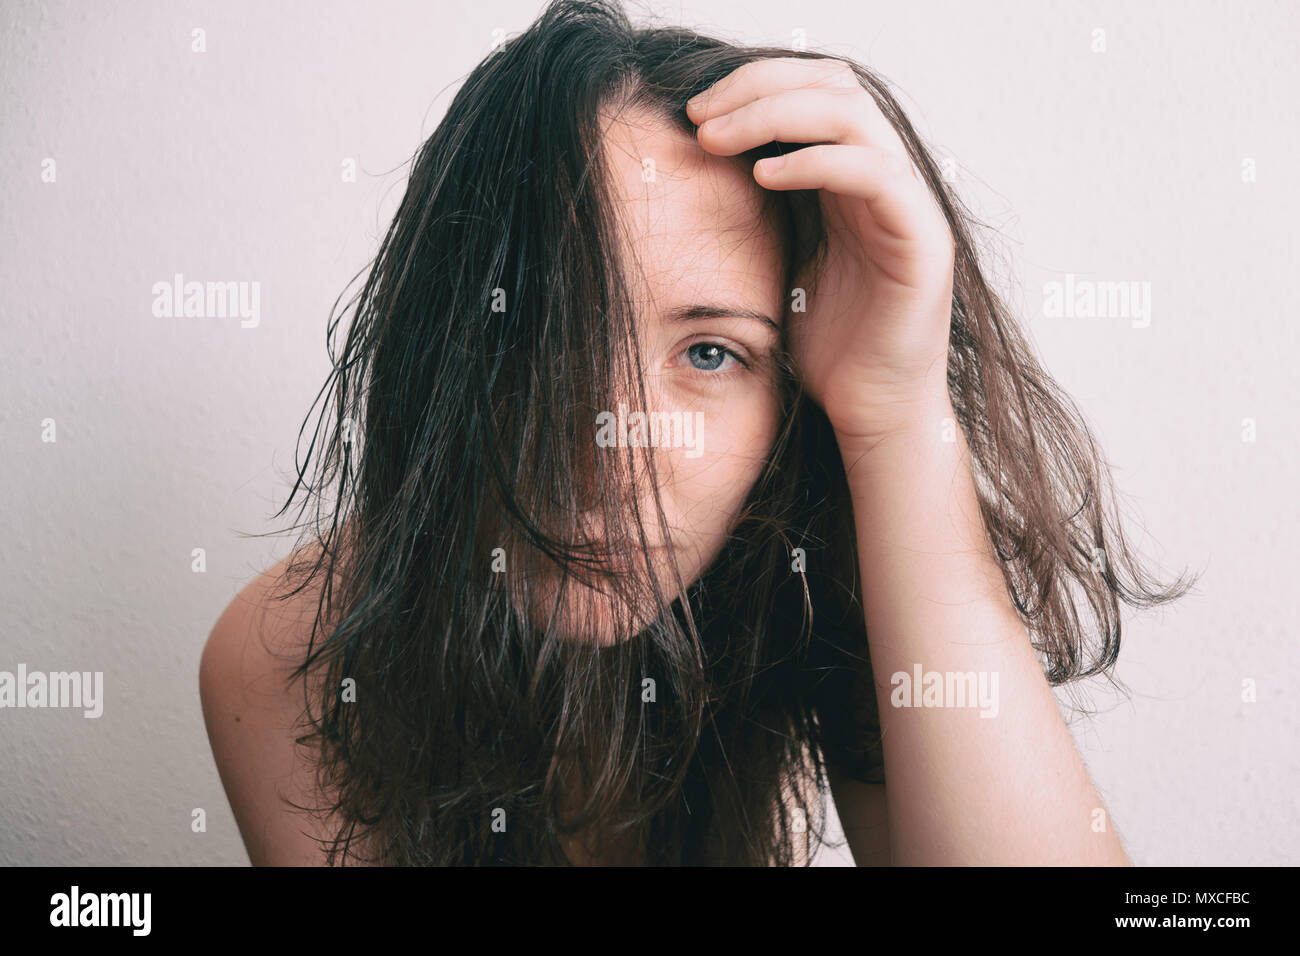 a girl with her face full of hair removing it with her hand Stock Photo